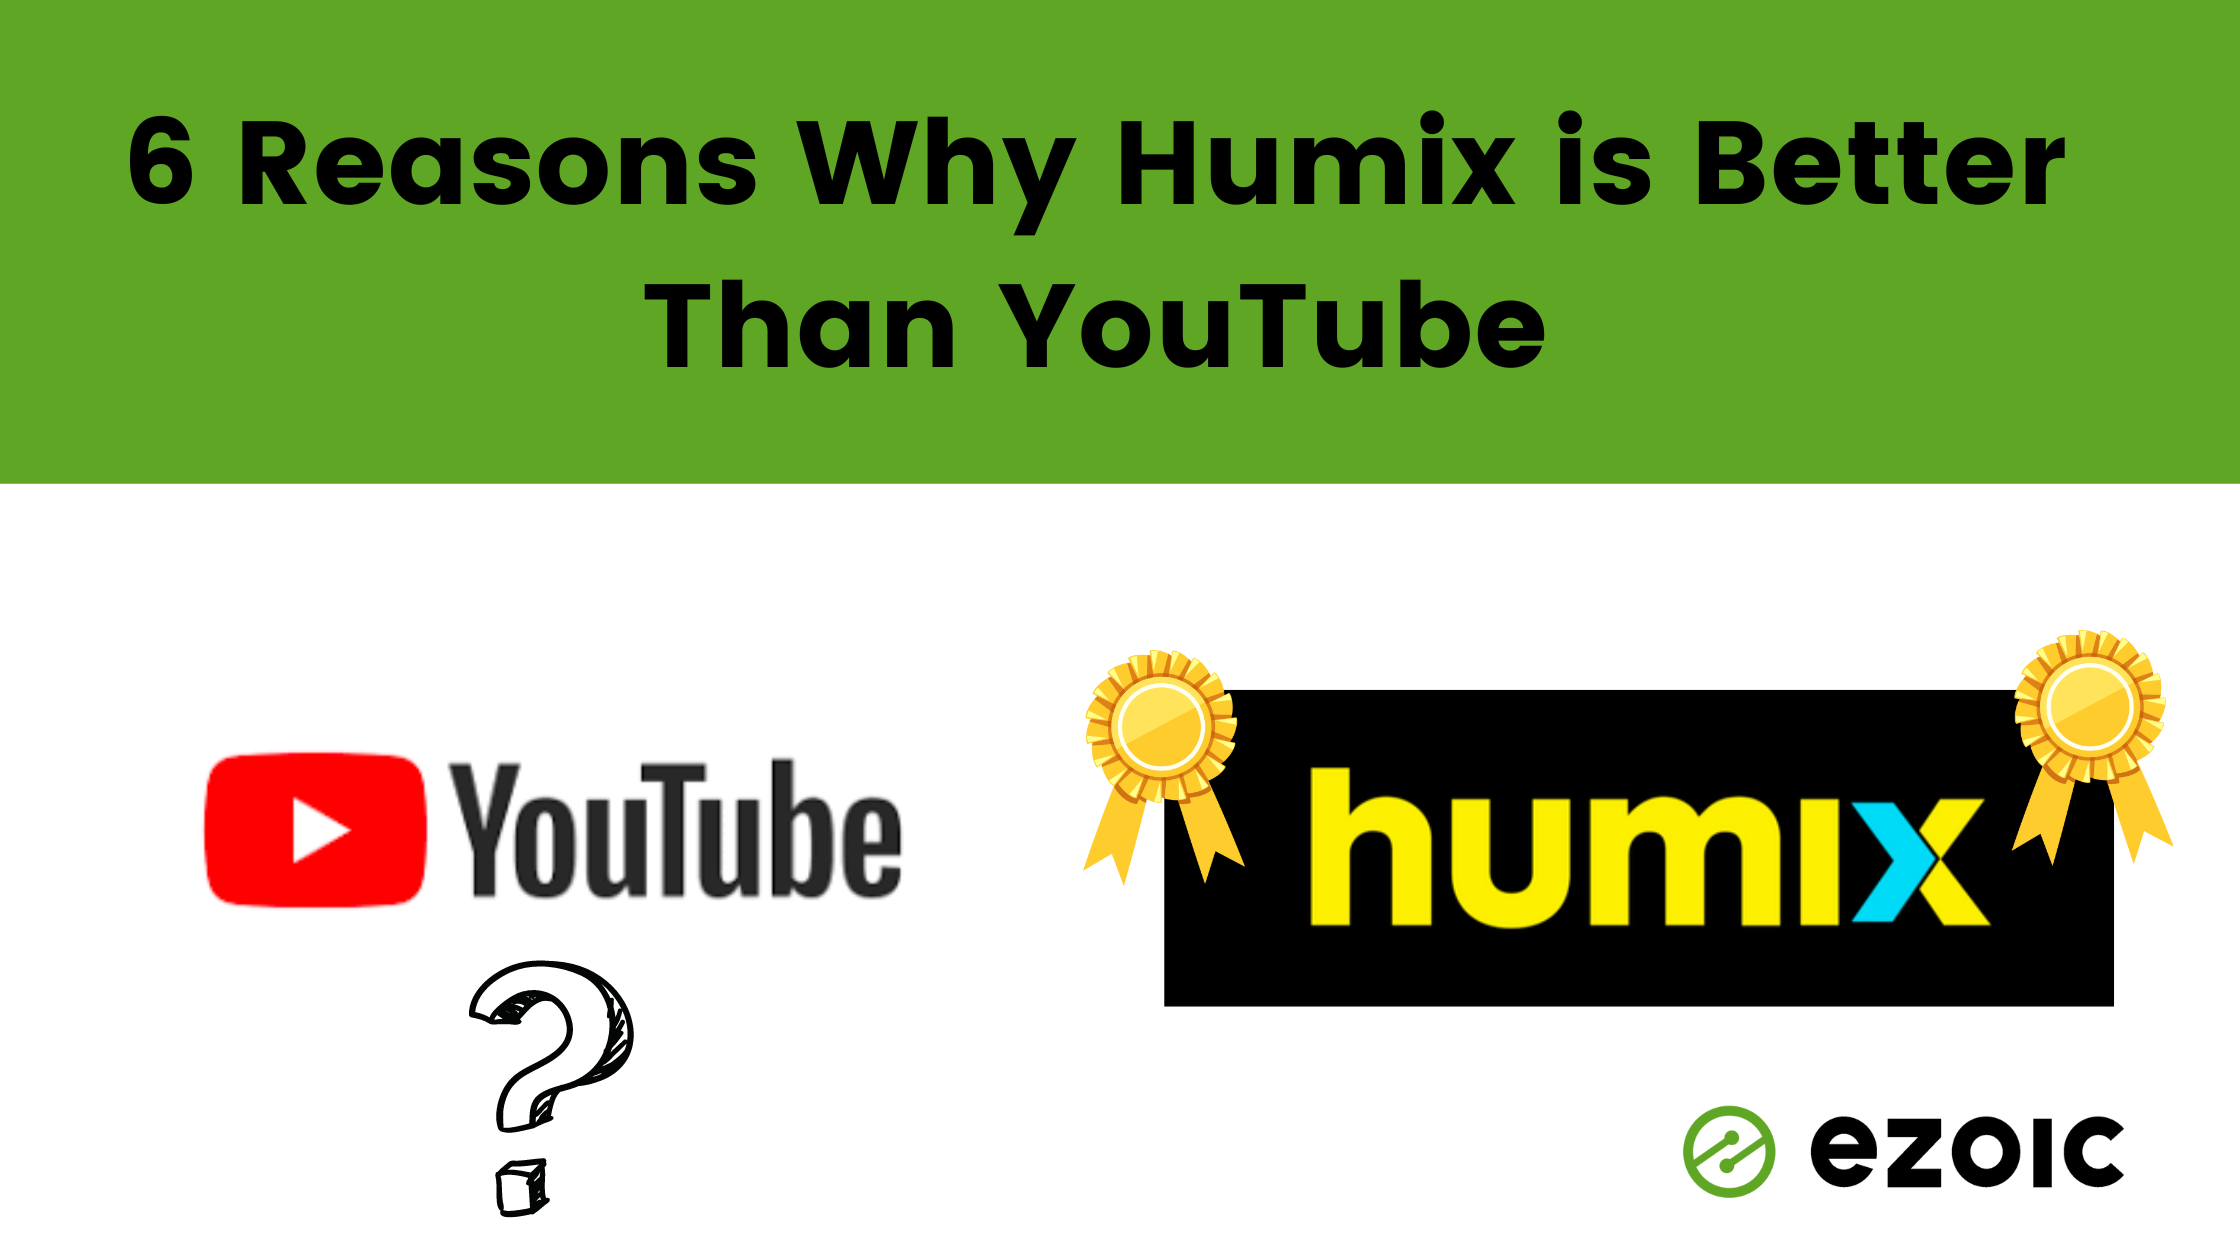 <strong>6 Reasons Why Humix is Better Than YouTube</strong>